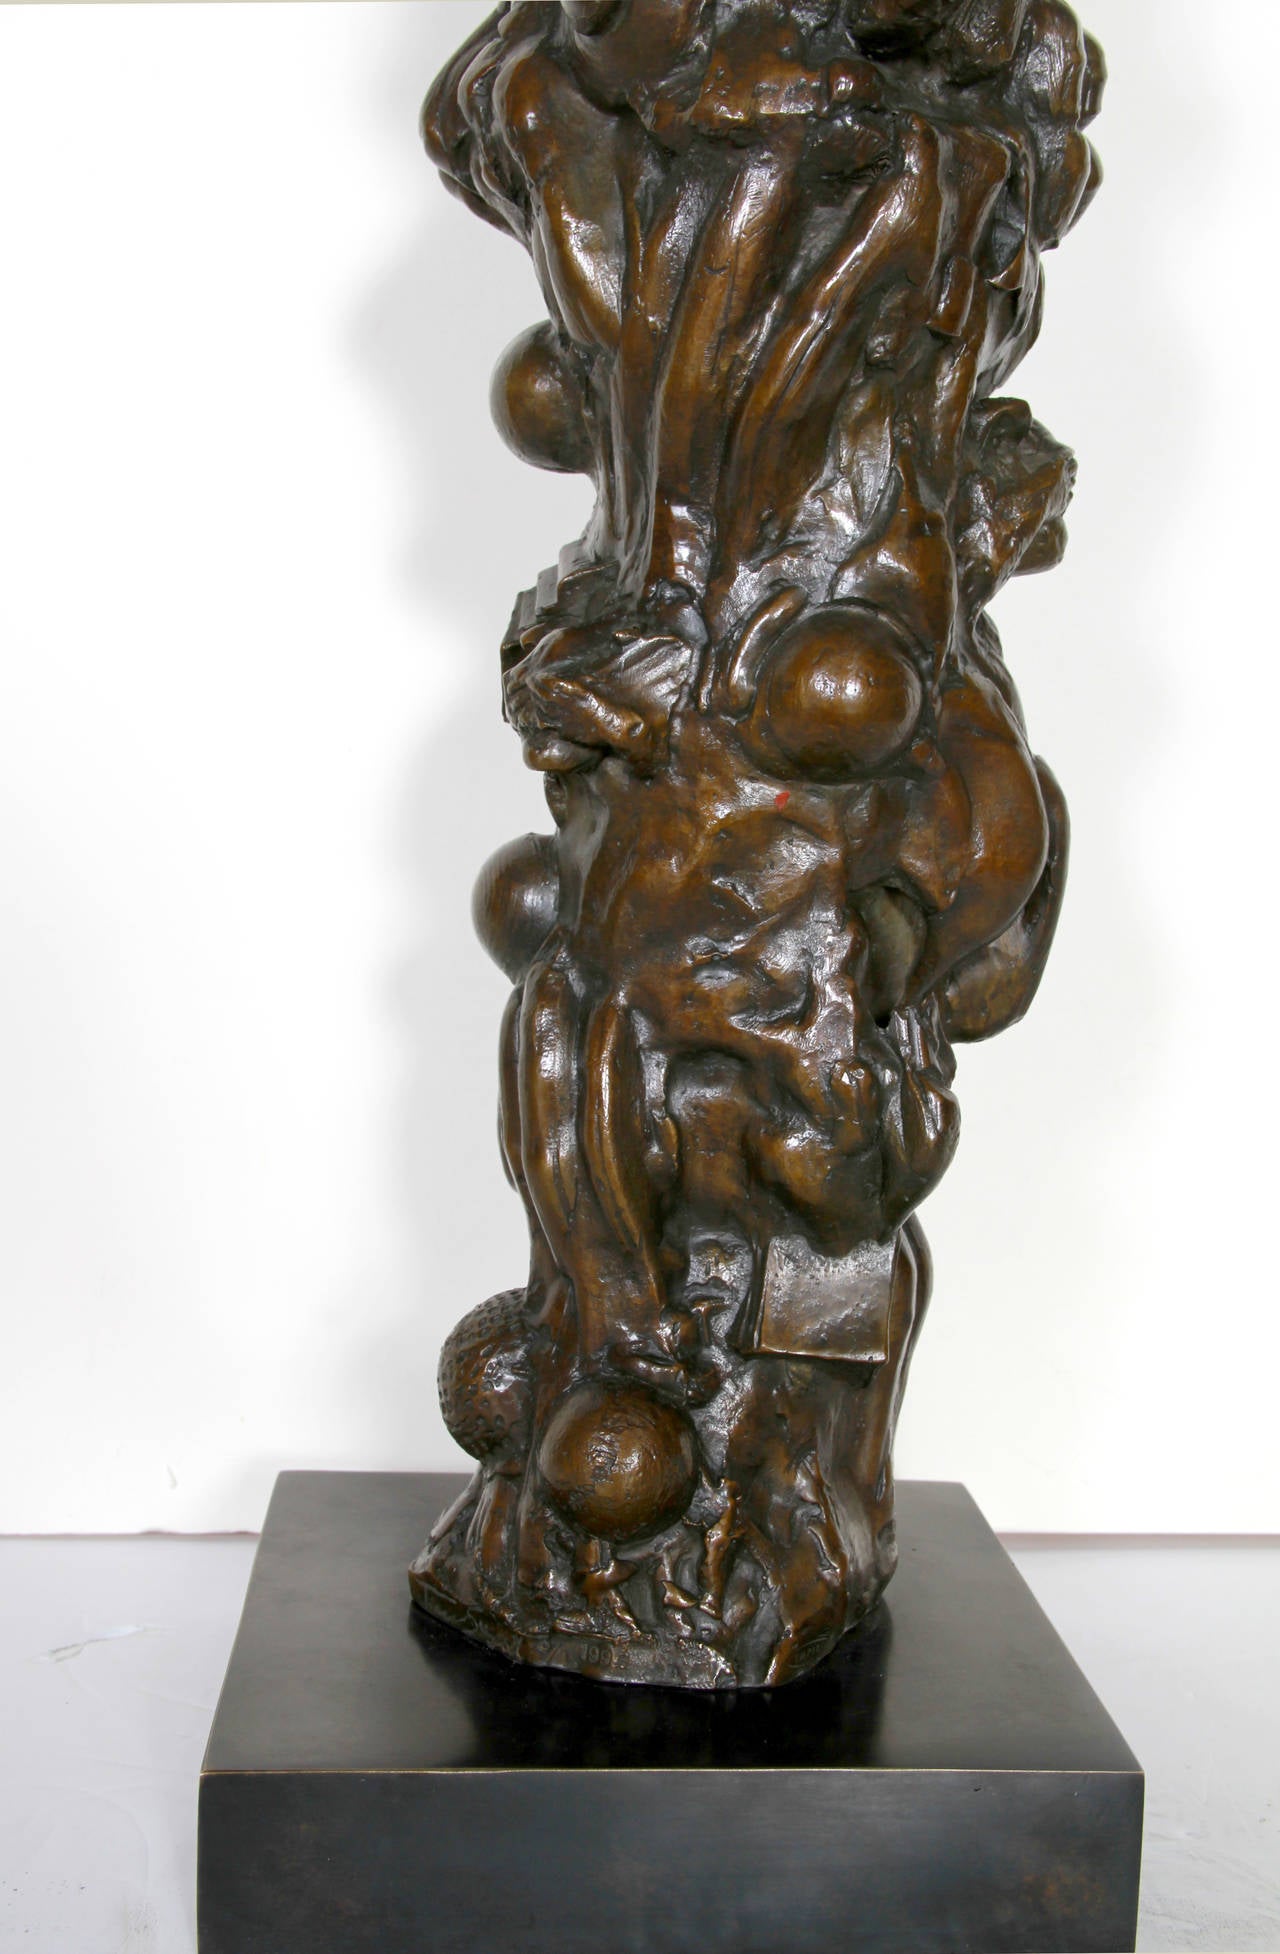 Artist: Tom Suzuki, Japanese/American (1930 - 2006)
Title: Untitled
Year: 1995
Medium: Bronze, signature and number inscribed
Edition: 3/4
Size: 31 in. x 8 in. x 8 in. (78.74 cm x 20.32 cm x 20.32 cm)